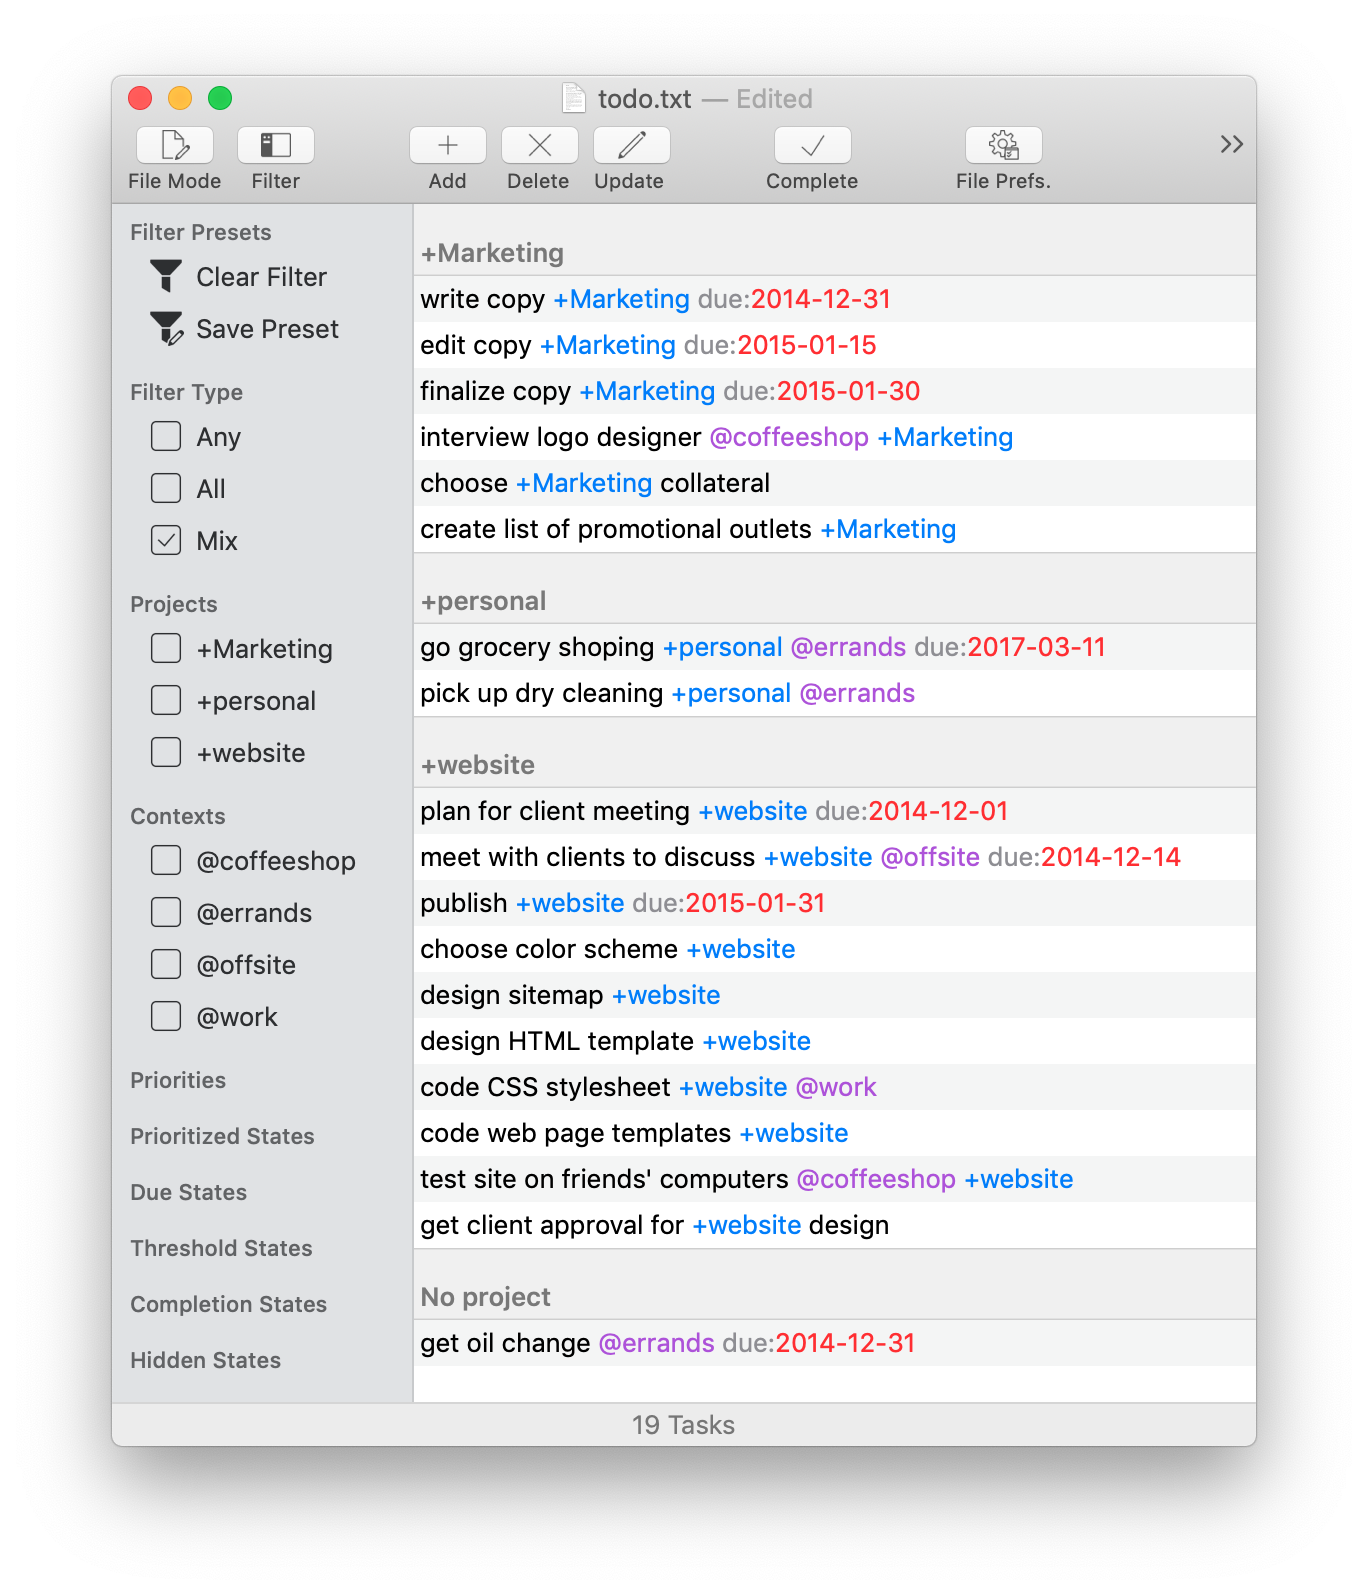 Screenshot of SwiftoDo Desktop running on macOS, showing the task list and the filter sidebar